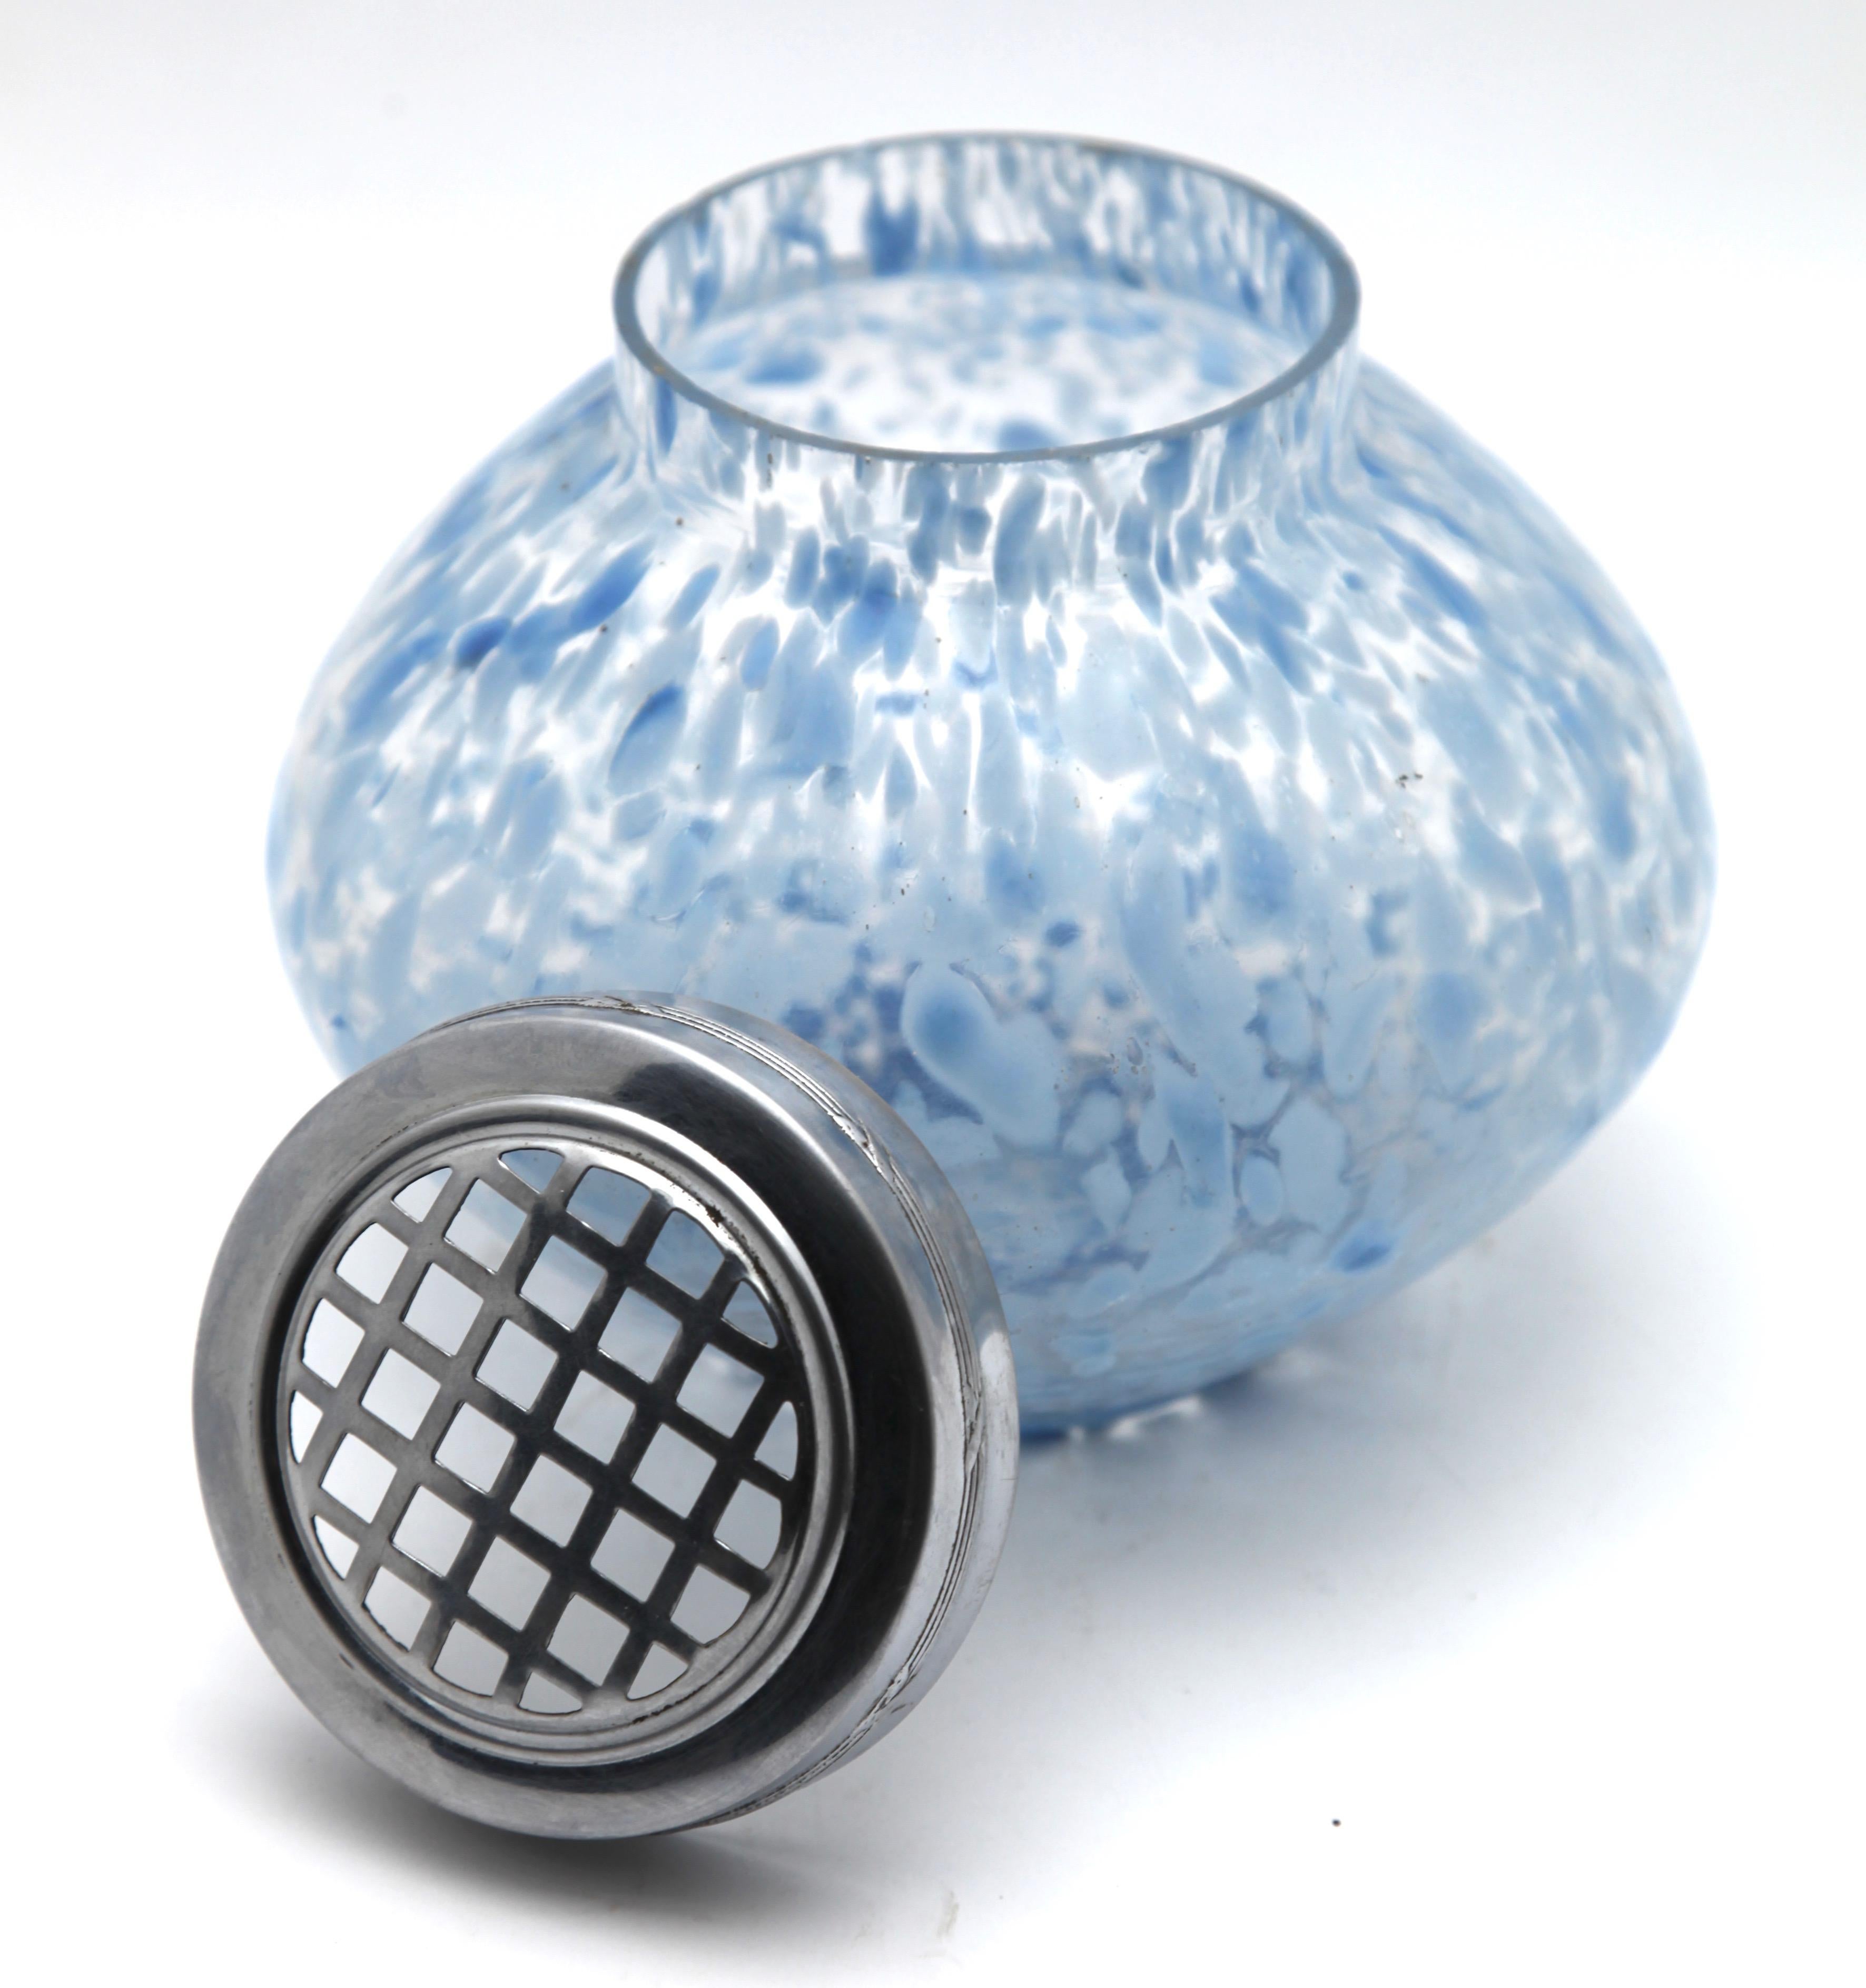 Czech Bohemian 'Pique Fleurs' Vase with Grille, Flecked with Blue, Late 1930s For Sale